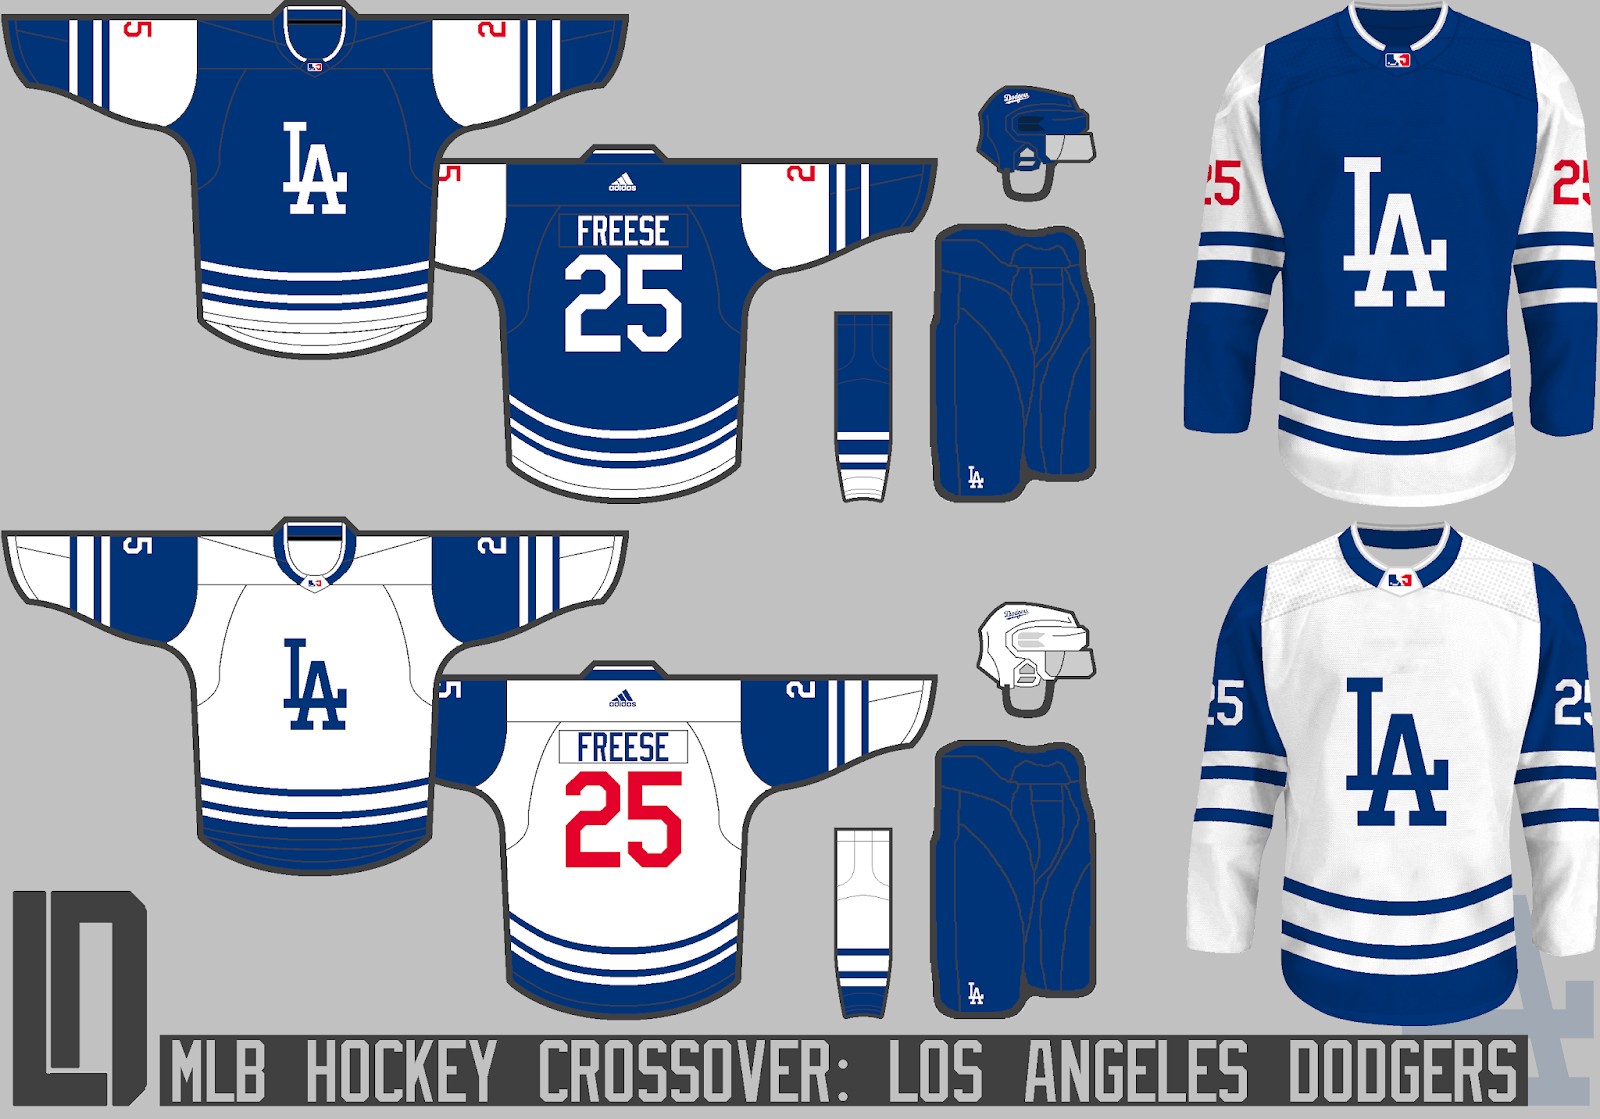 Heritage Uniforms and Jerseys and Stadiums - NFL, MLB, NHL, NBA, NCAA, US  Colleges: Los Angeles Dodgers Uniform and Team History